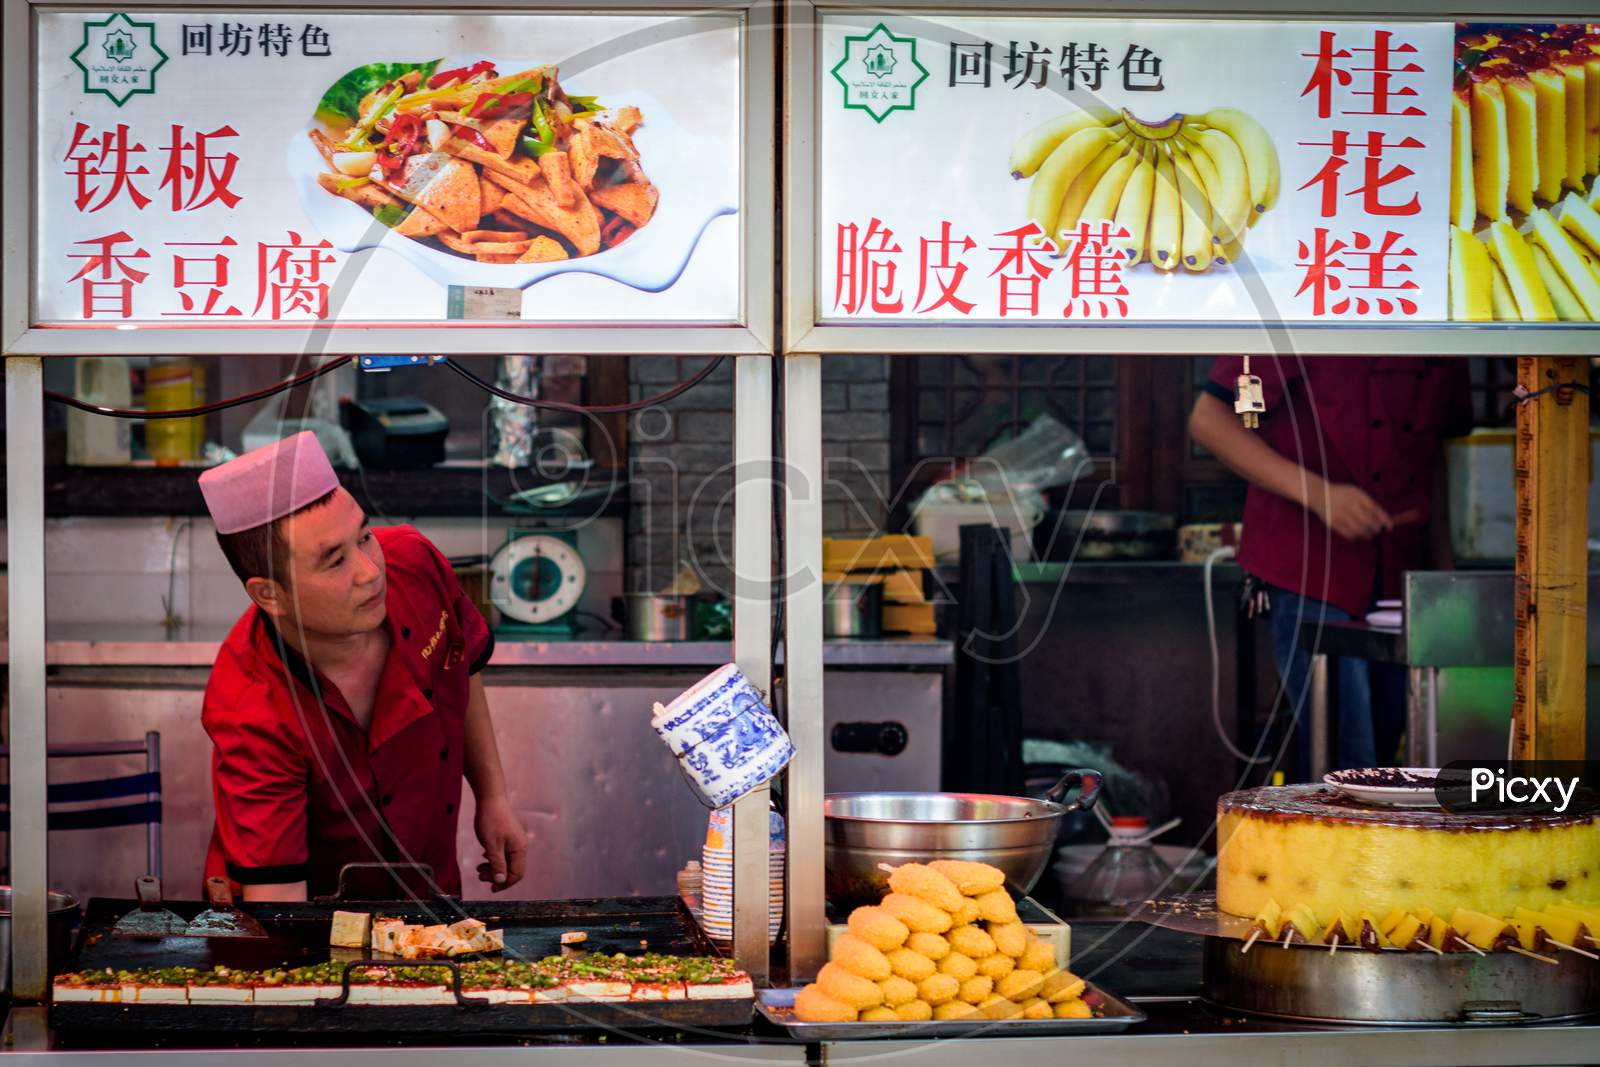 Street Vendors Selling Food In Muslim Quarter Of Xian, Shaanxi Province, China